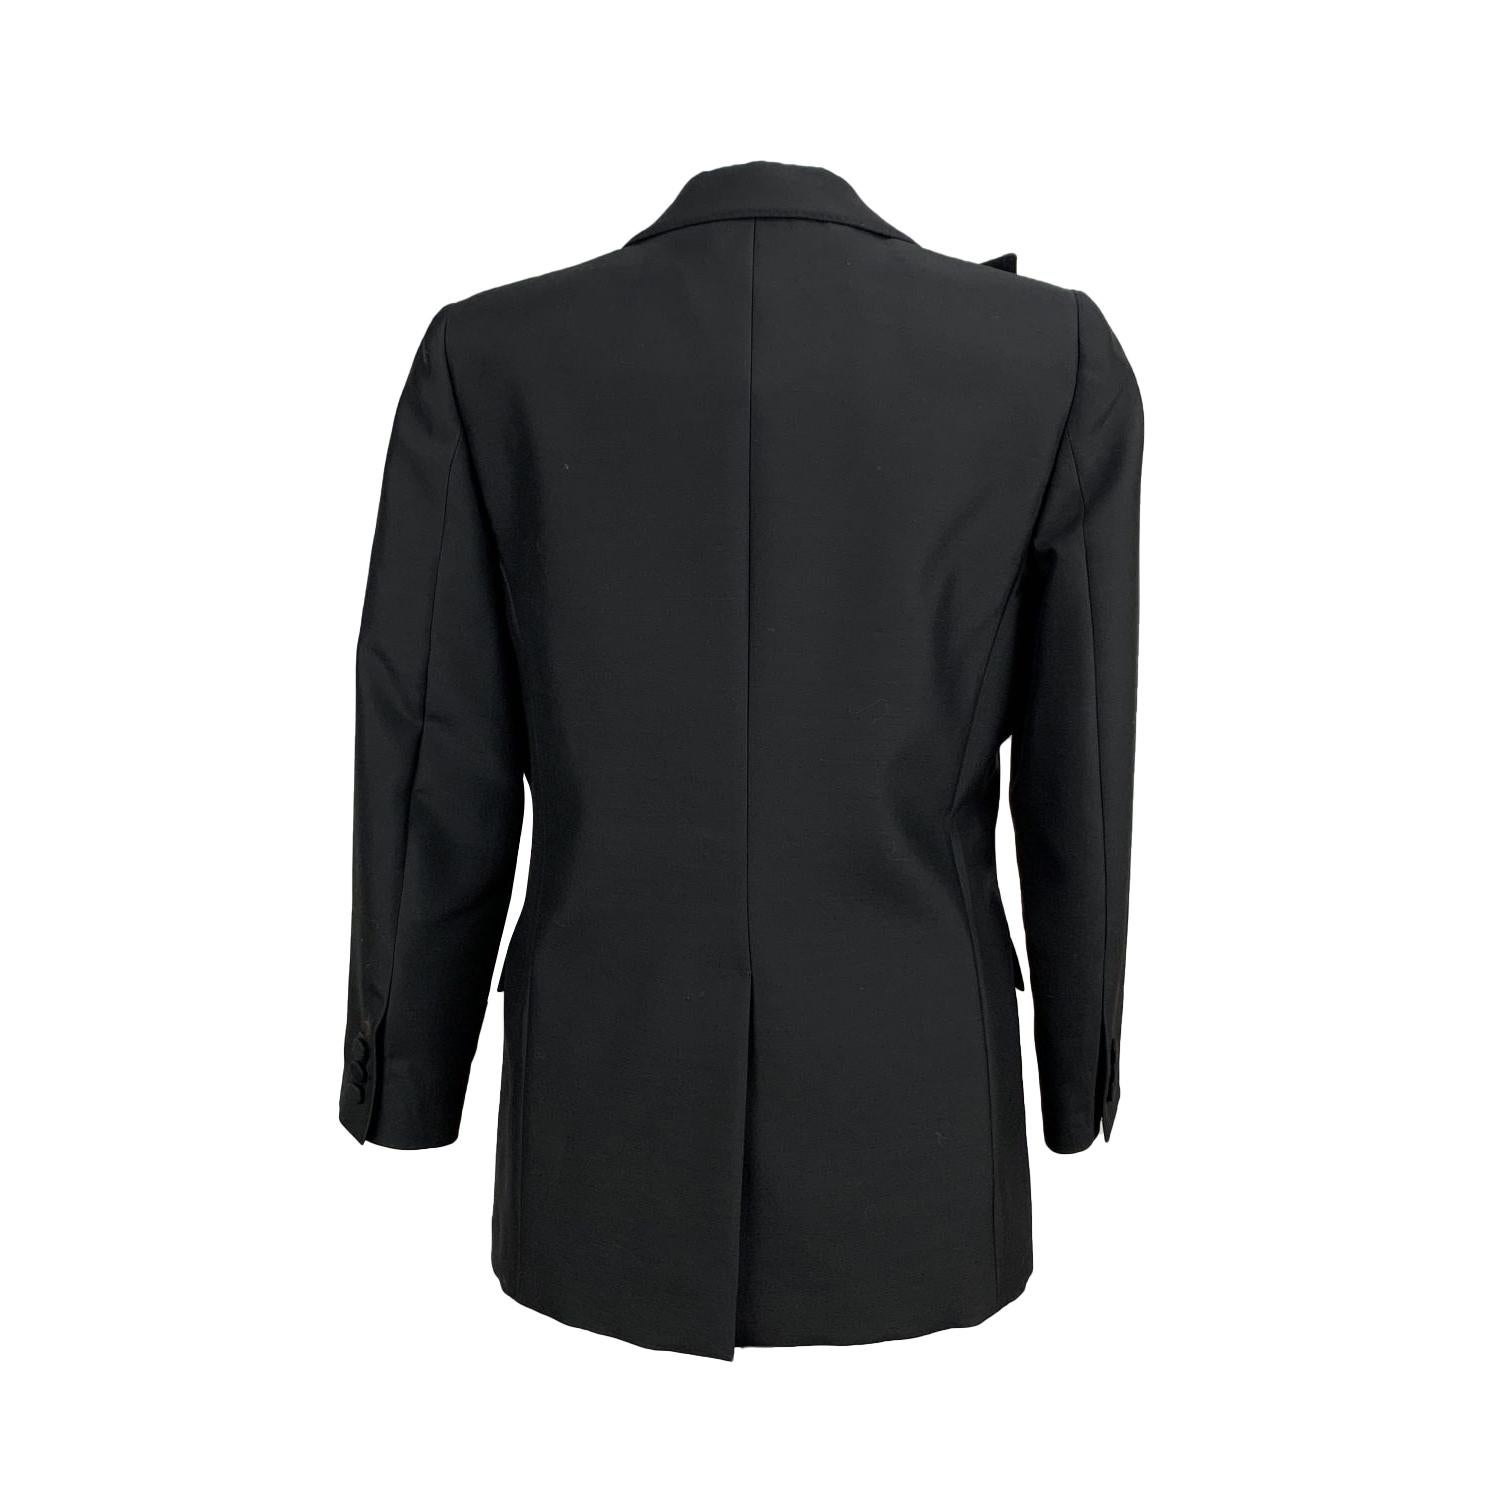 VALENTINO blazer in black wool blend fabric. It features ruffled lapel. Long Sleeves with buttoned cuffs. 2 flap pockets. Lined. Composition: 72% Fleece Wool, 28% Silk. Size: 6 (The size shown for this item is the size indicated by the designer on